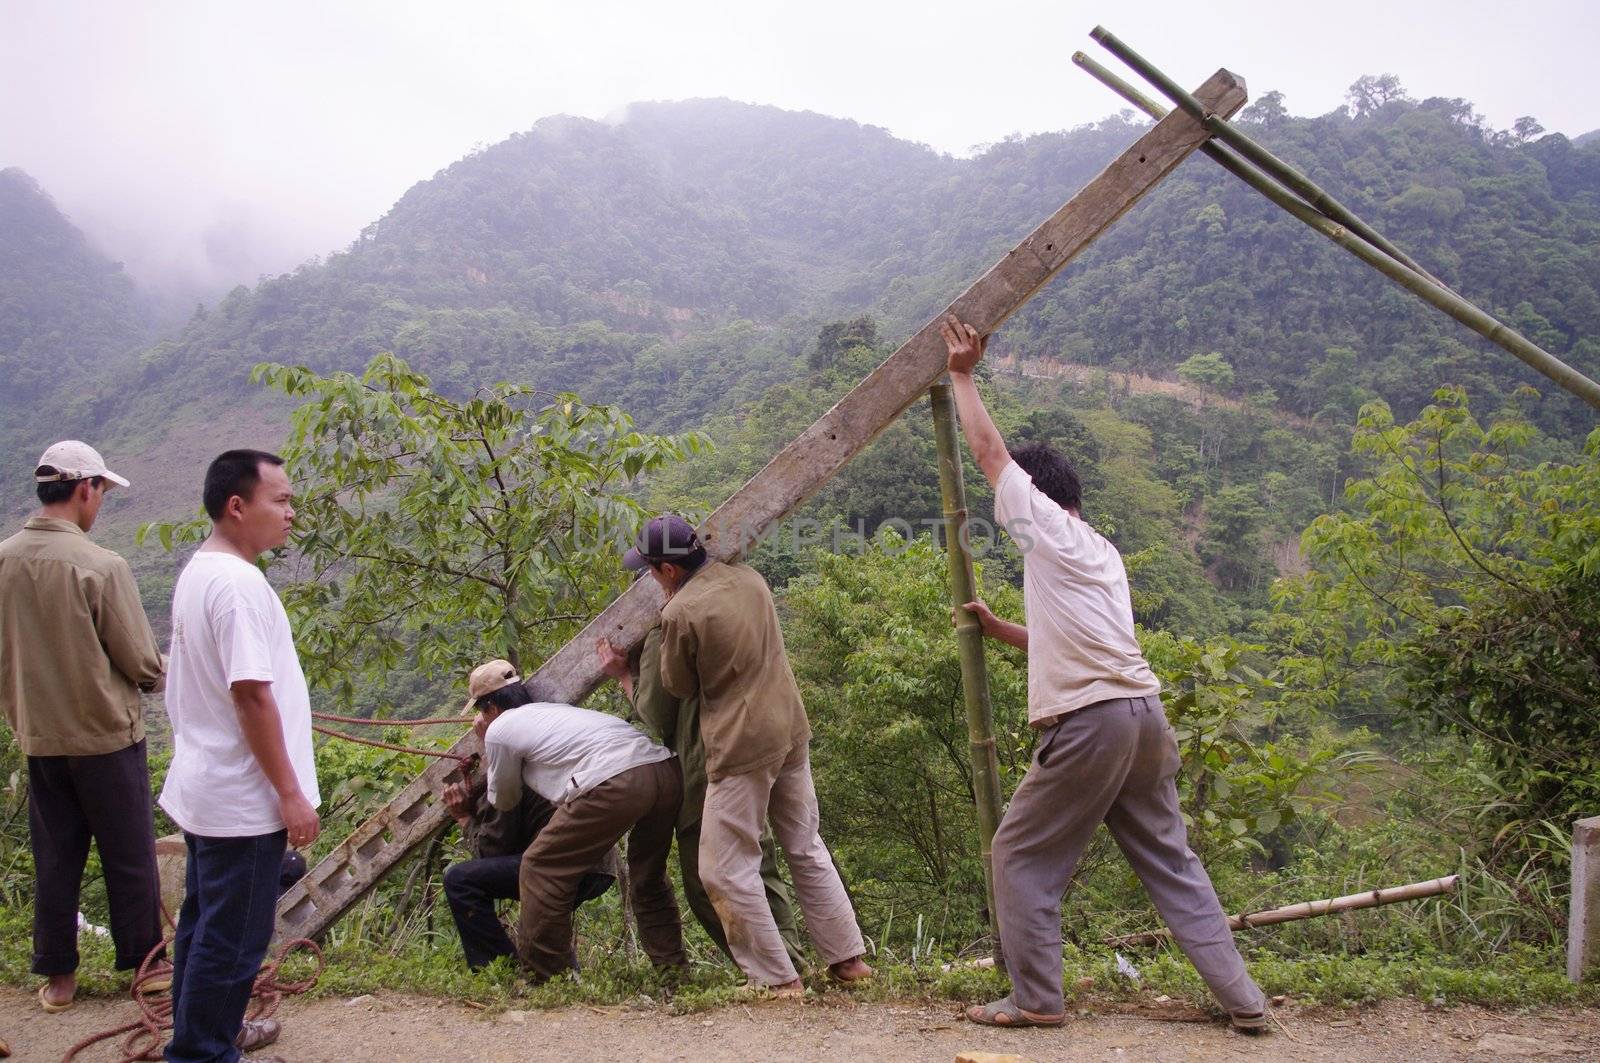 At the roadside stand men of concrete poles for laying electrical and telephone line. Nine men are needed for this dangerous operation. As the hole is in the slope of the precipice, at any time the post can slide carrying men with him. Men are usually held, no safety shoes, but flip-flops